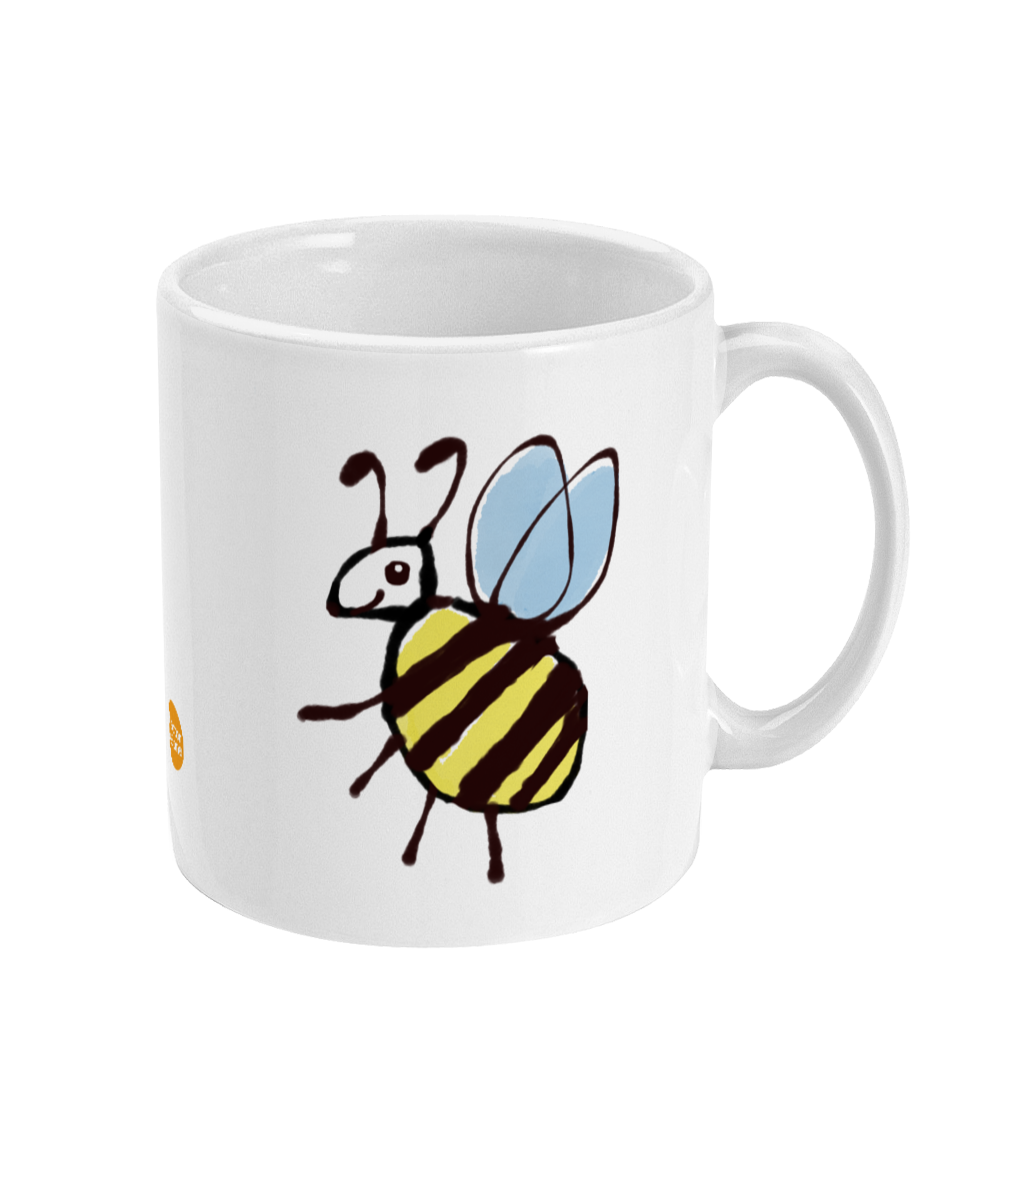 Cute Busy Bee design coffee mug by Hector and Bone Right View